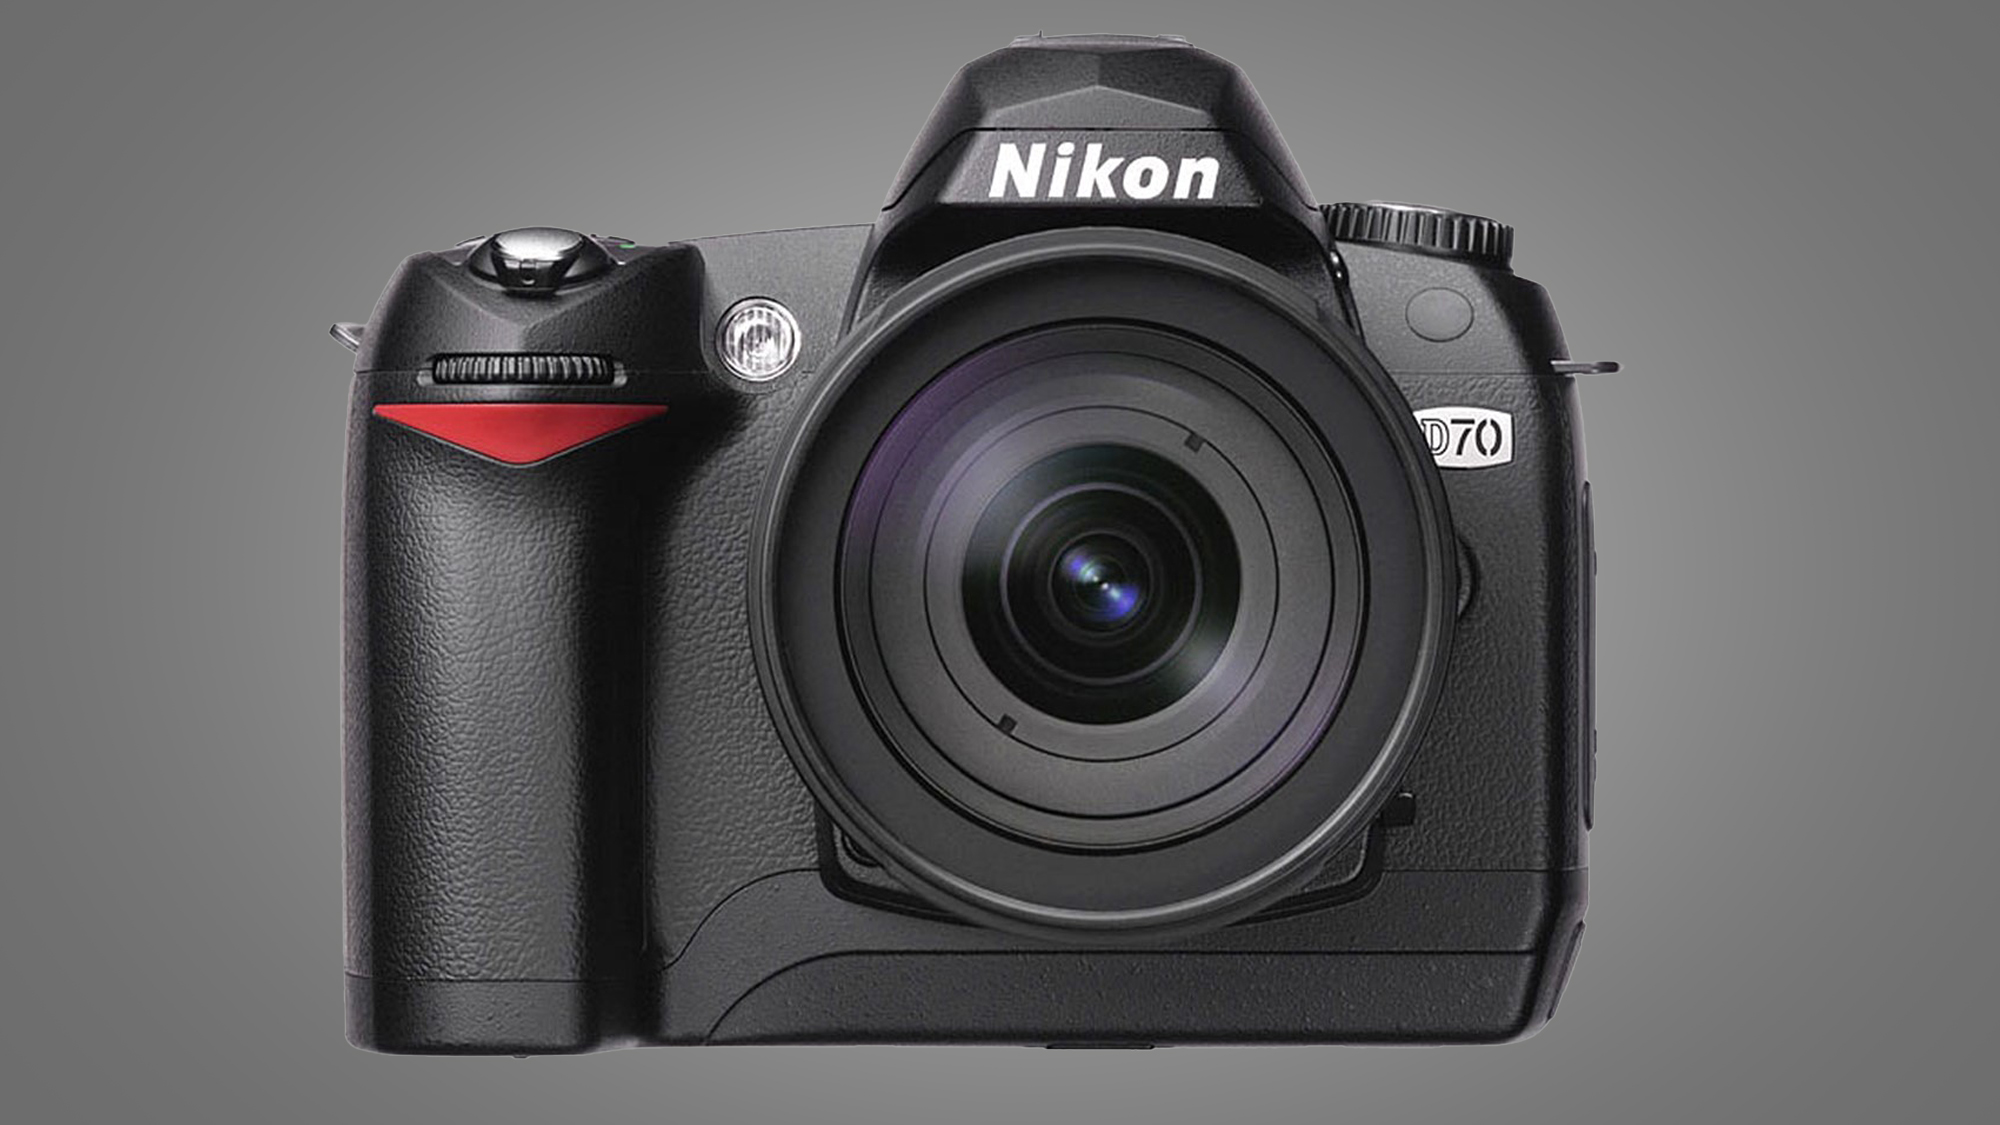 The Nikon D70 camera on a grey background